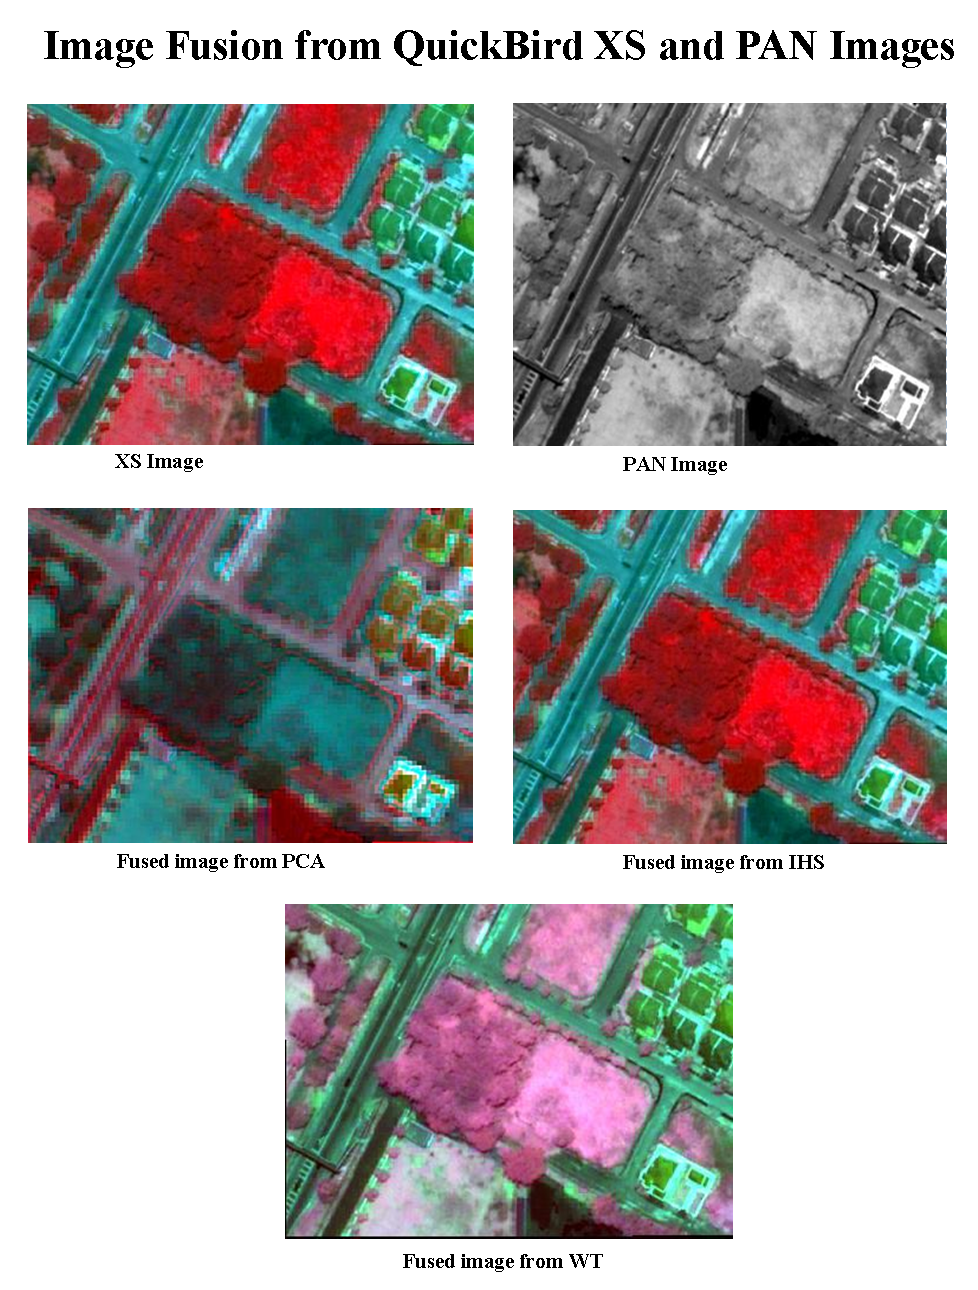 Comparison of Three Image Fusion Techniques Employed on High Resolution QuickBird Images